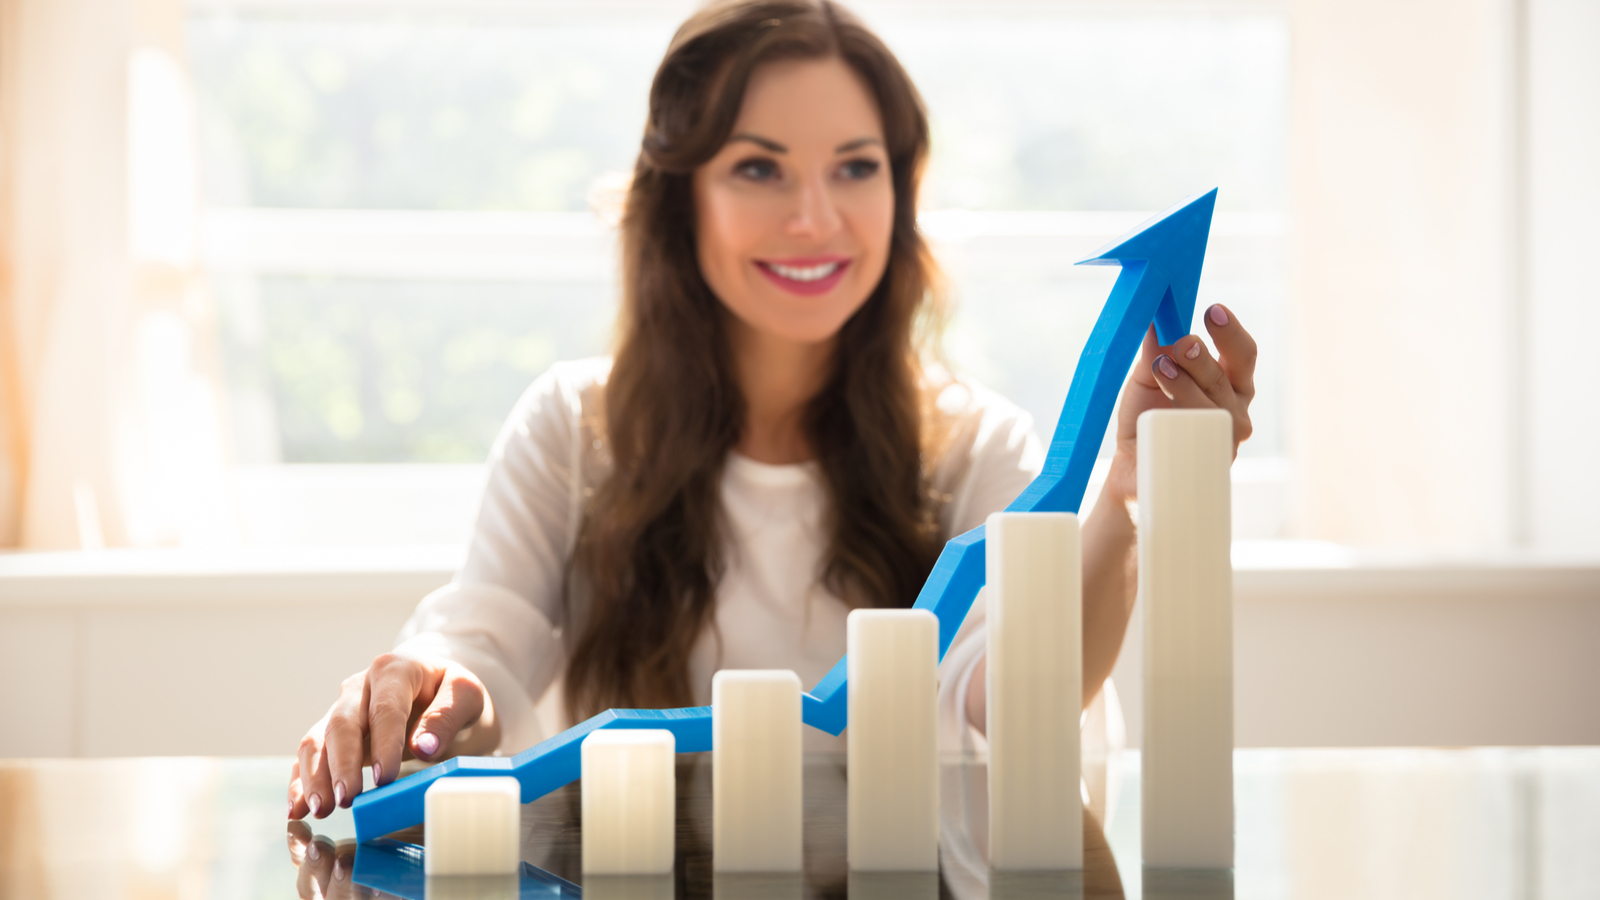 Increasing Graph In Front Of Happy Young Businesswoman Holding Blue Arrow